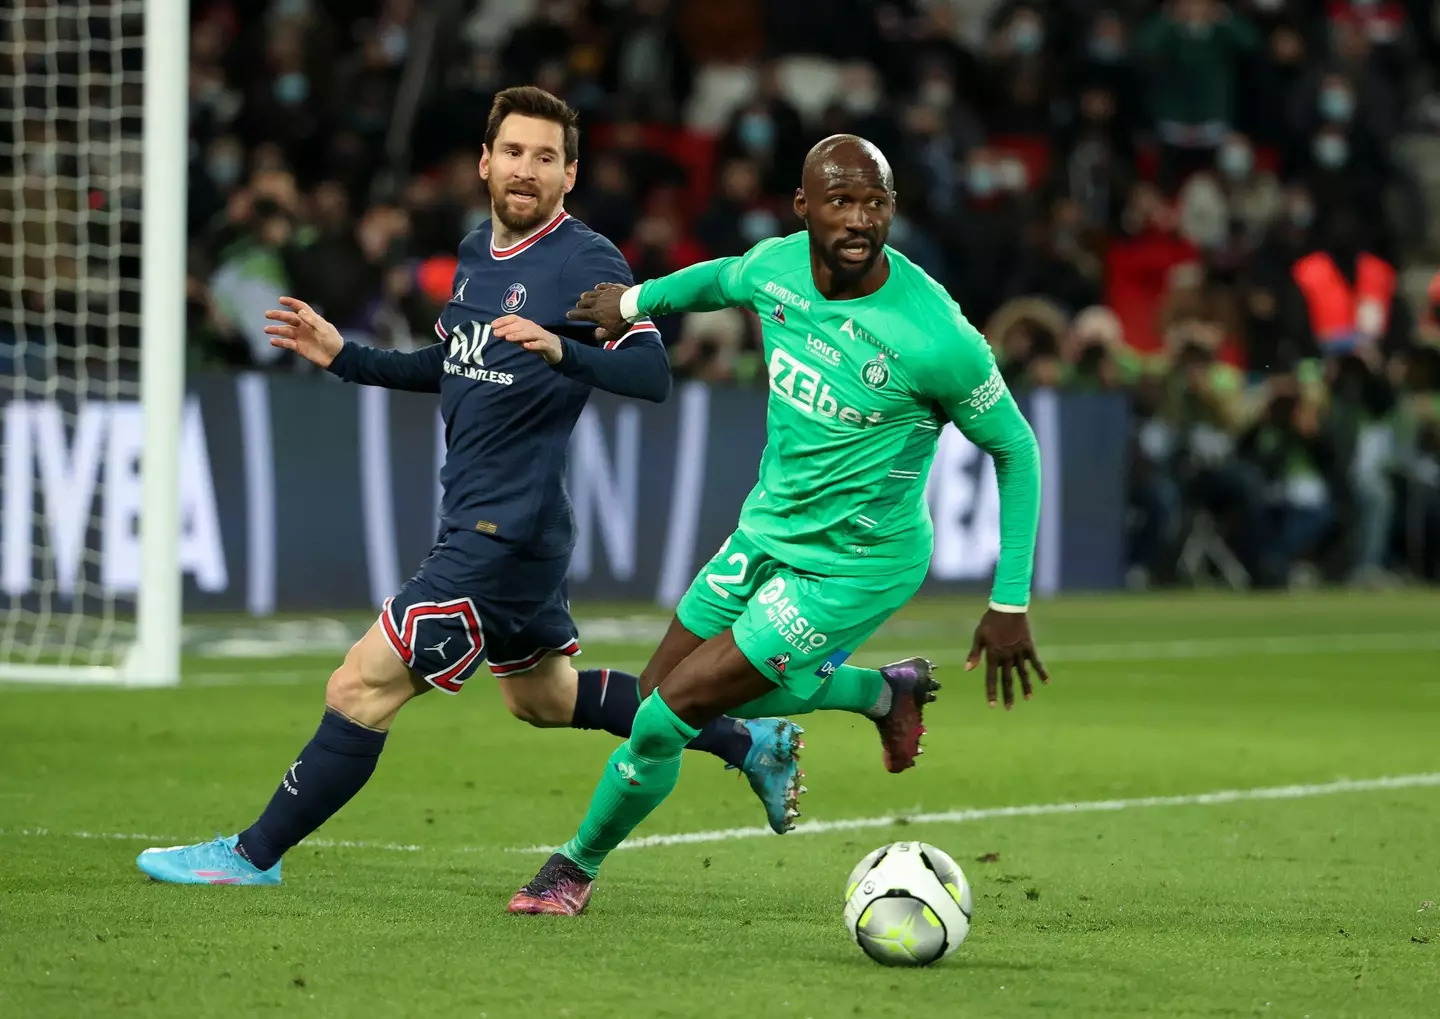 Eliaquim Mangala playing against Lionel Messi earlier this season. Image: PA Images